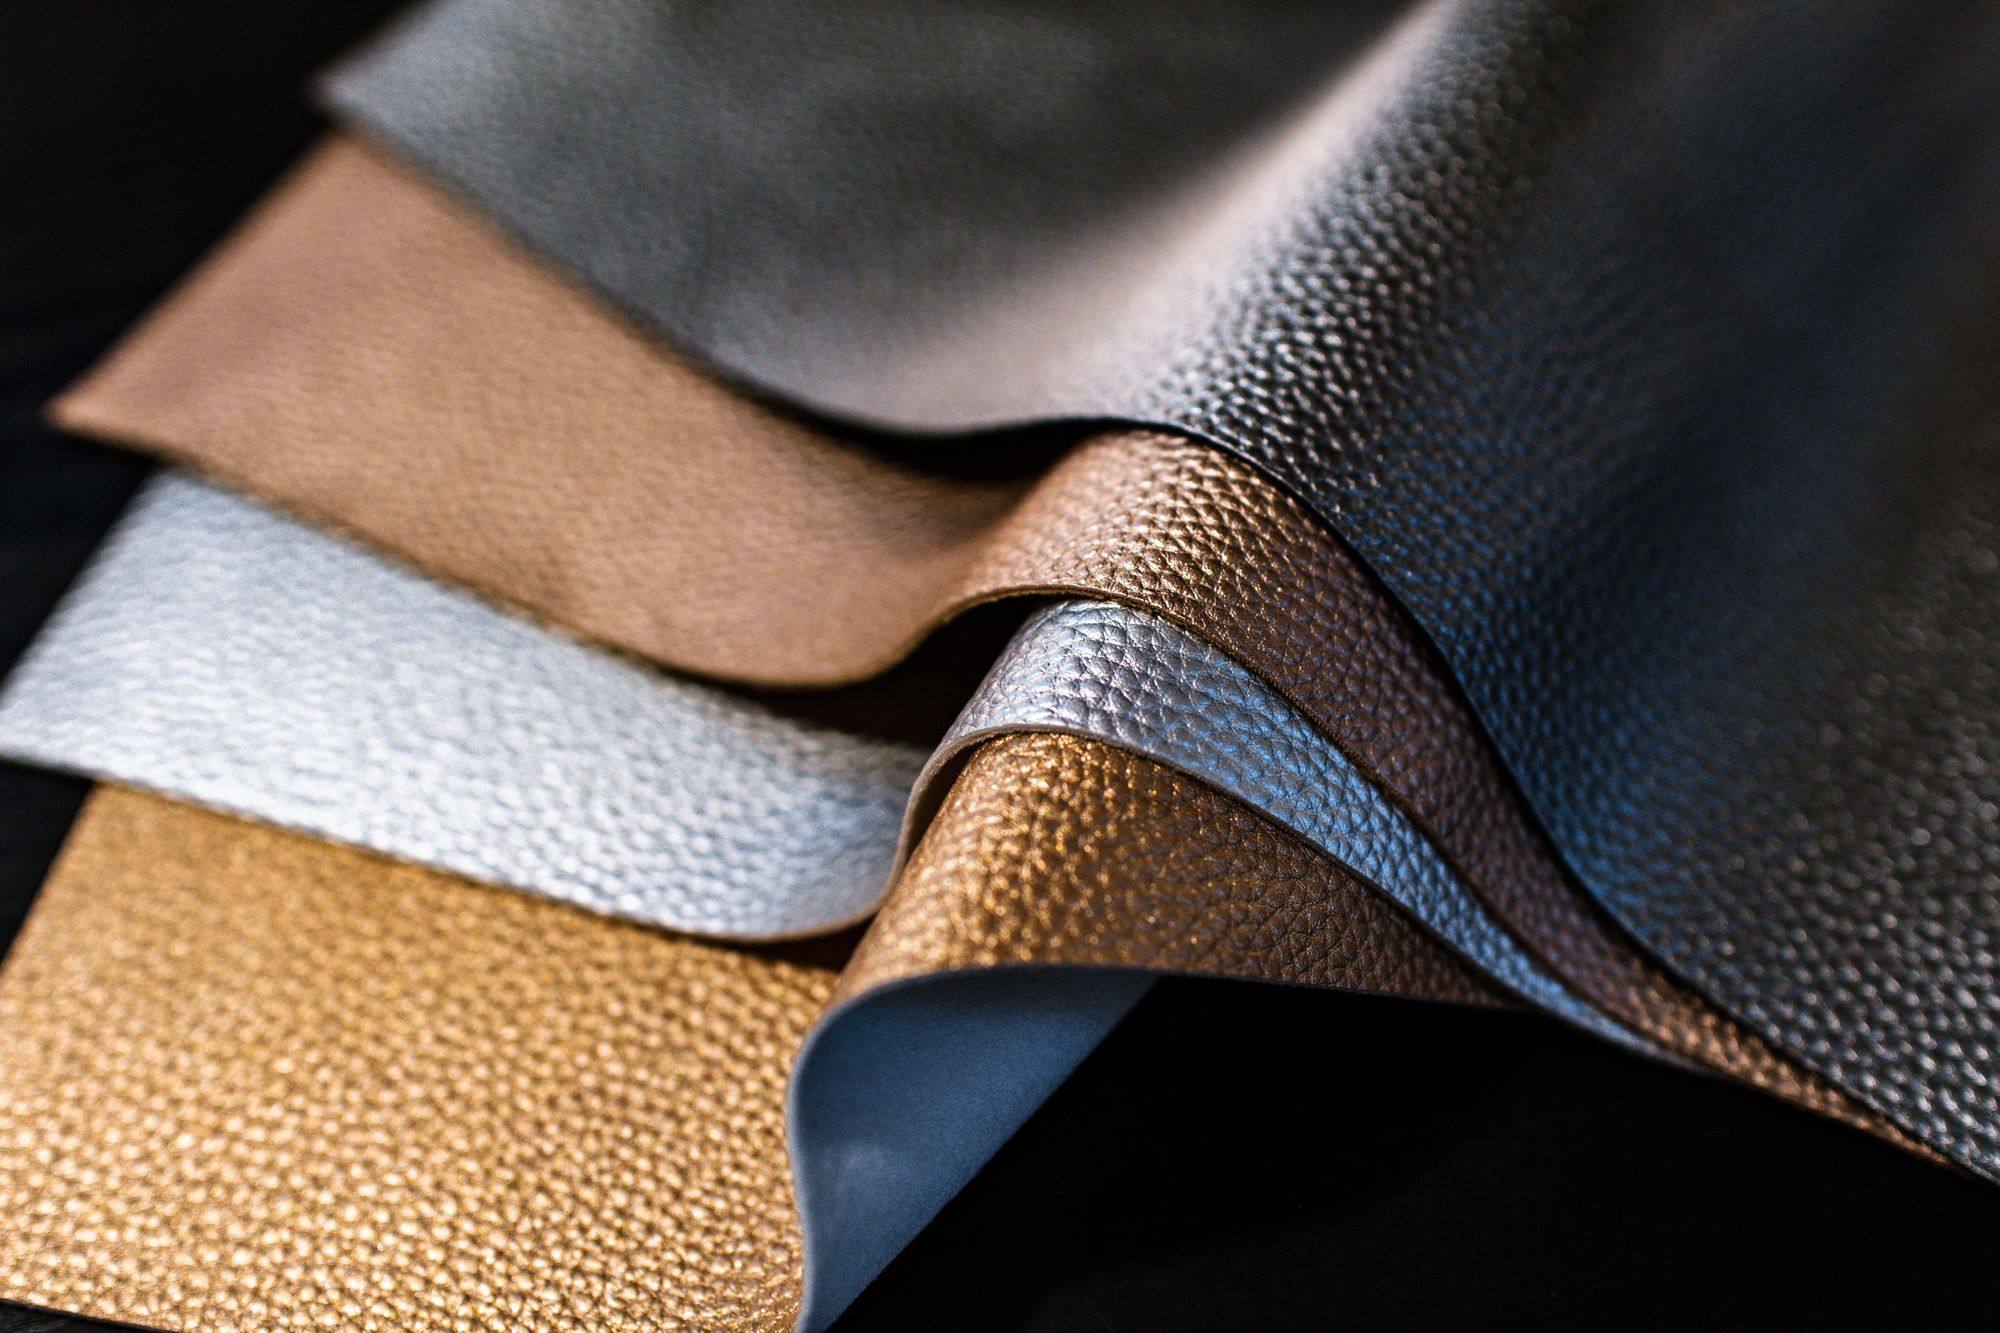 How Can You Tell if Leather Is High Quality?